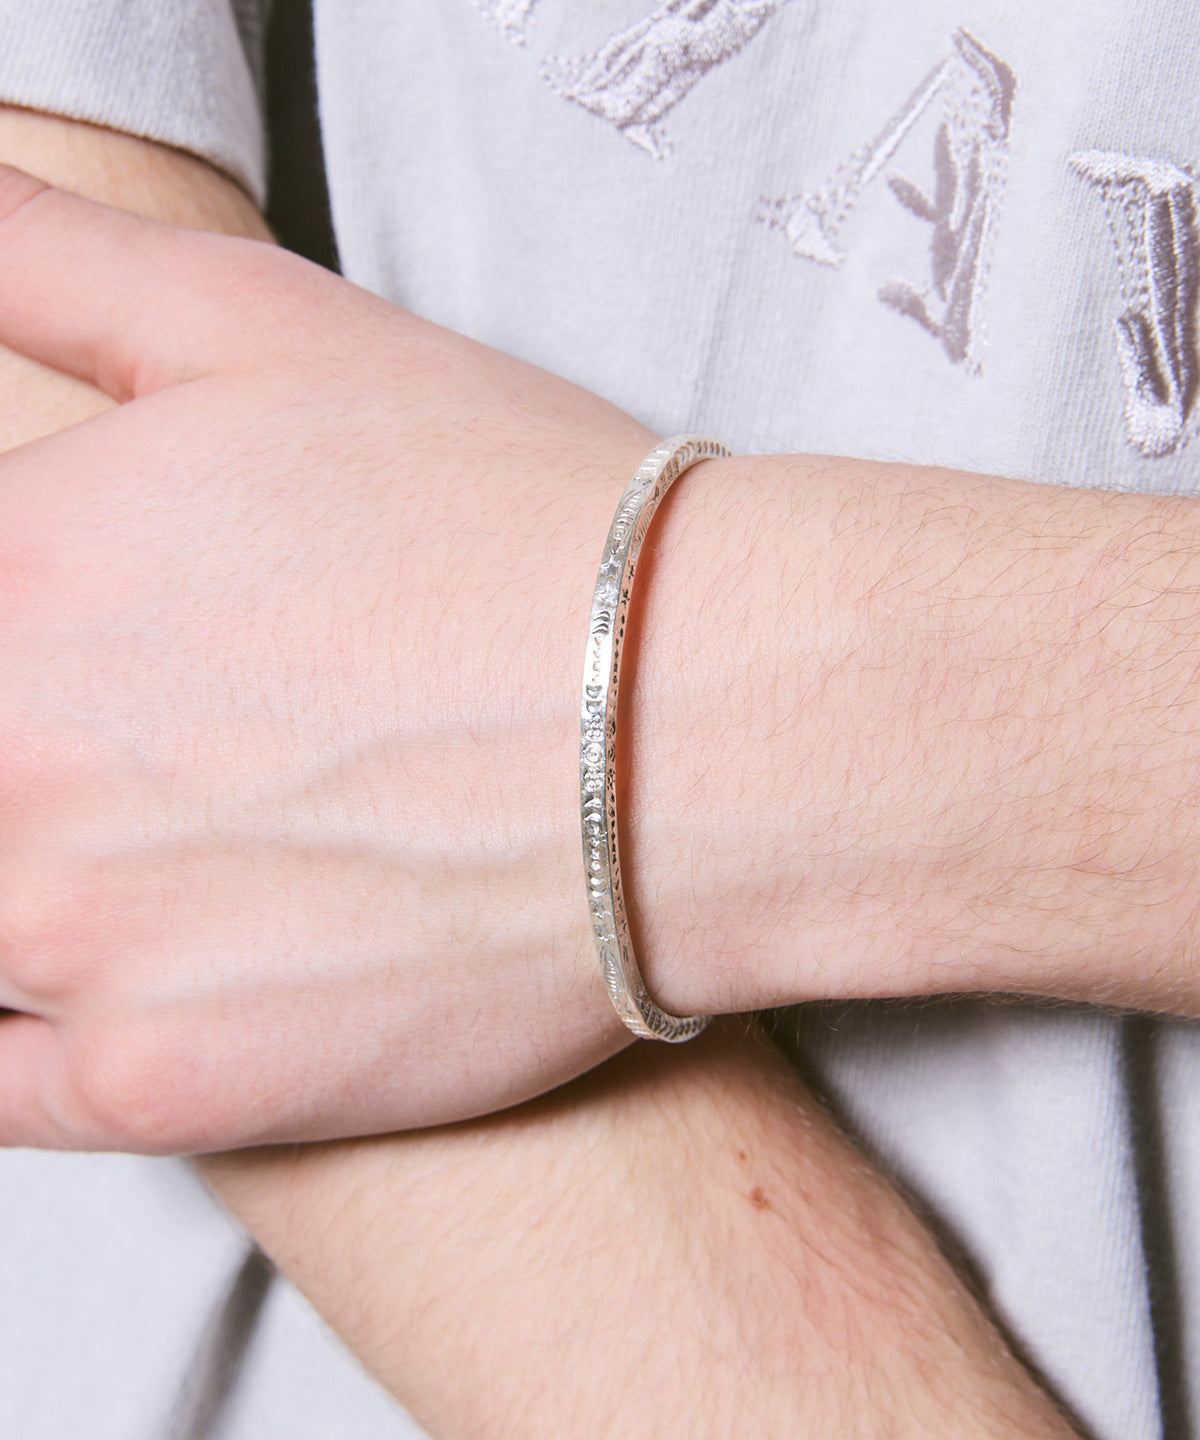 【Mountain People x MAISON SPECIAL】Bangle2